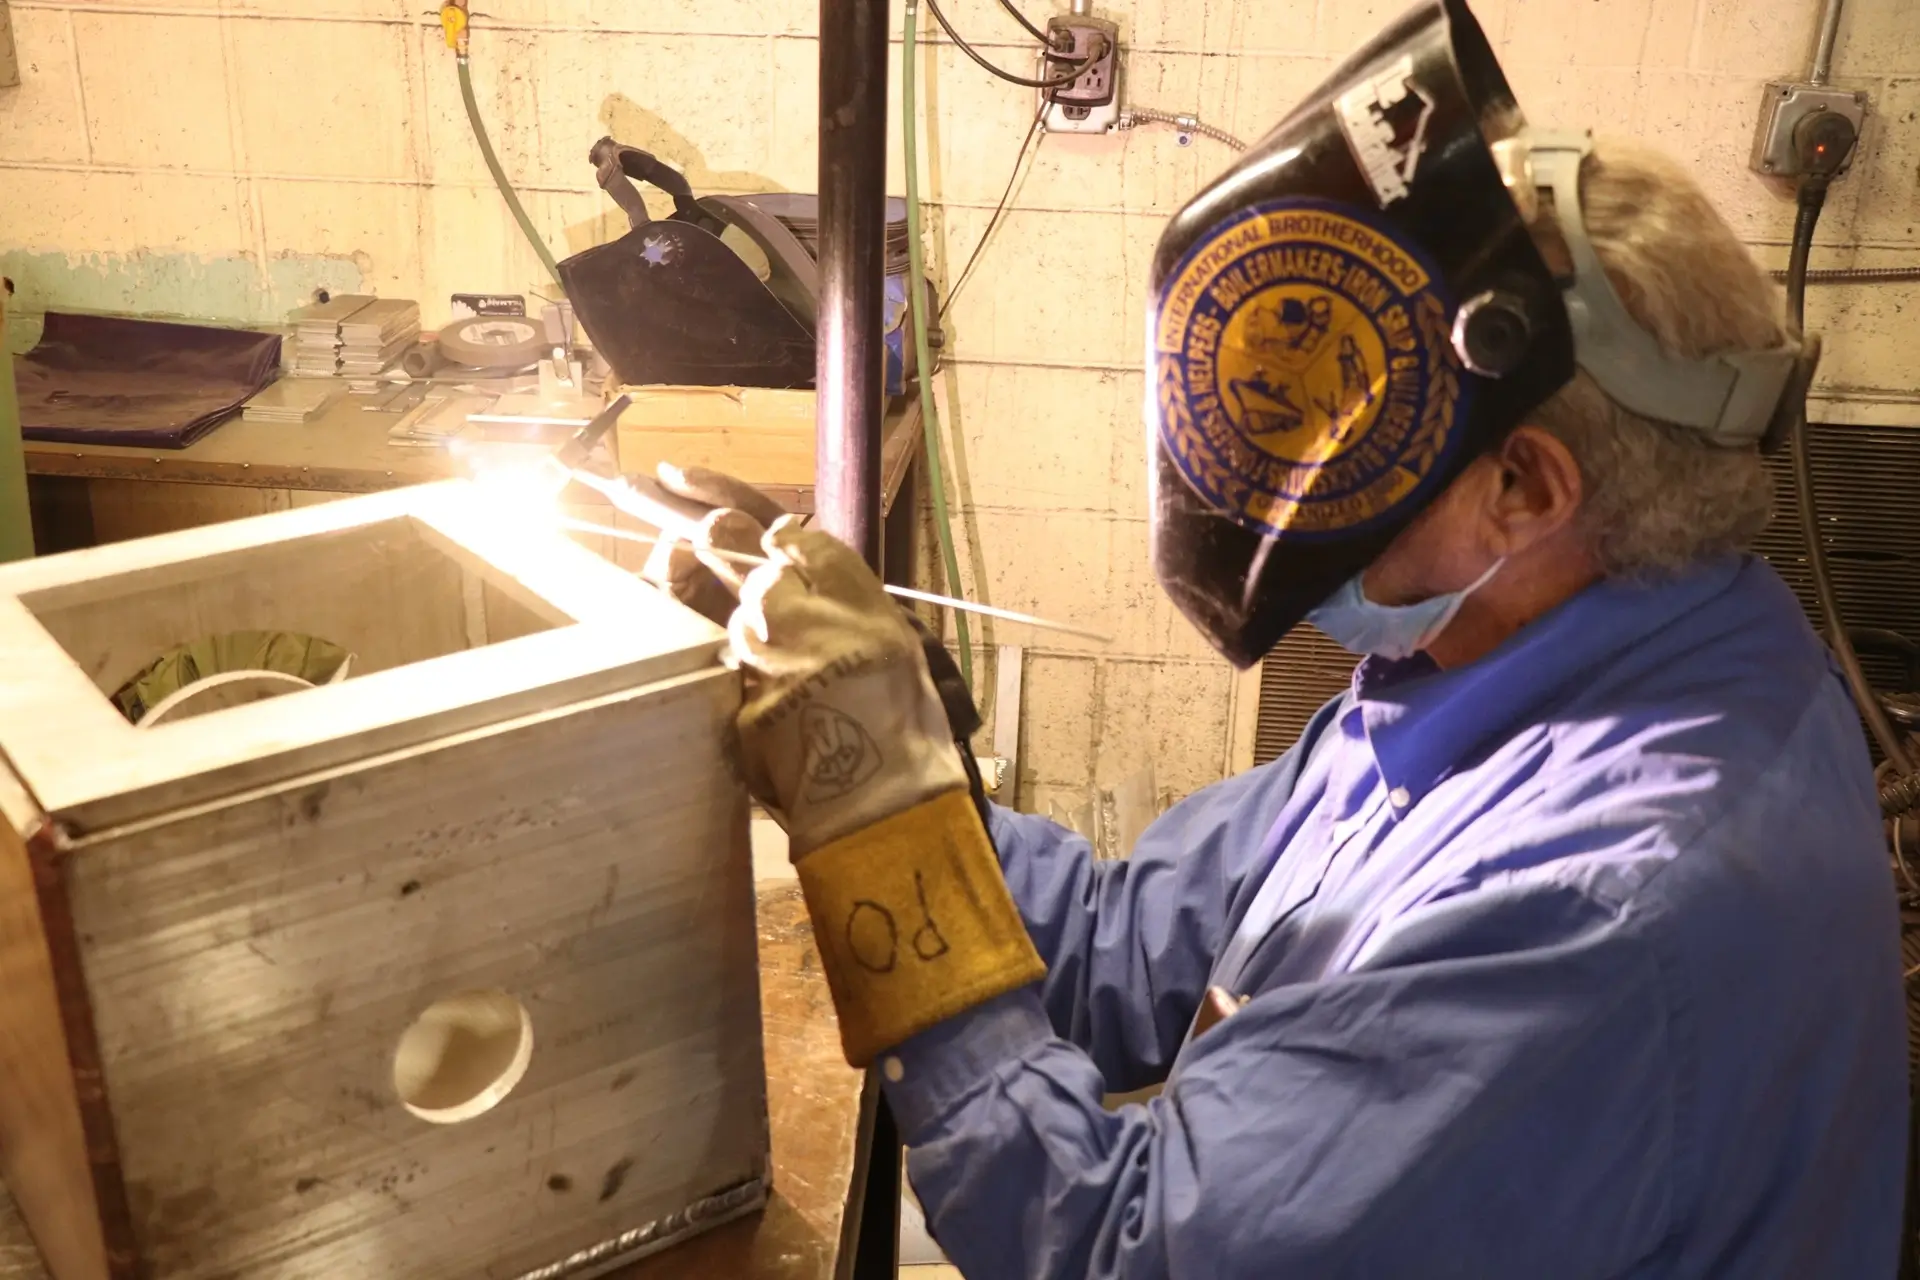 How Is The Working Environment Of A Welder?